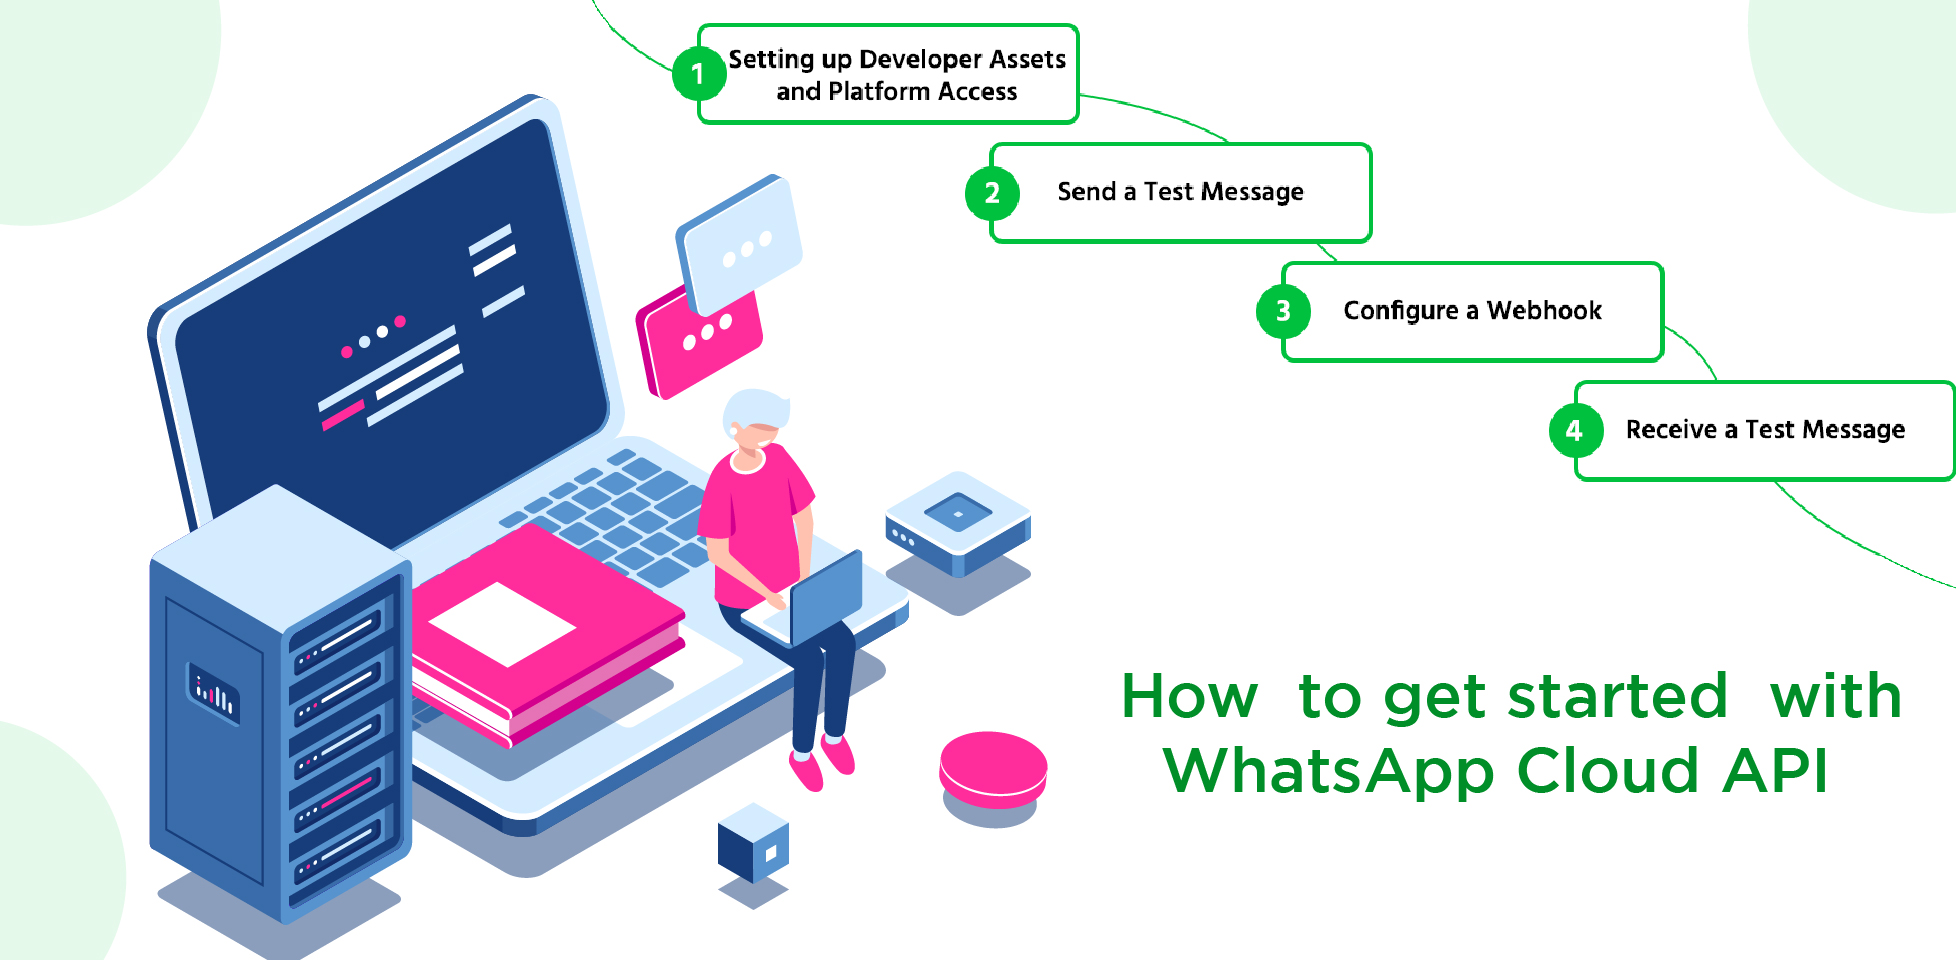 Get WhatsApp Cloud API by following these steps.